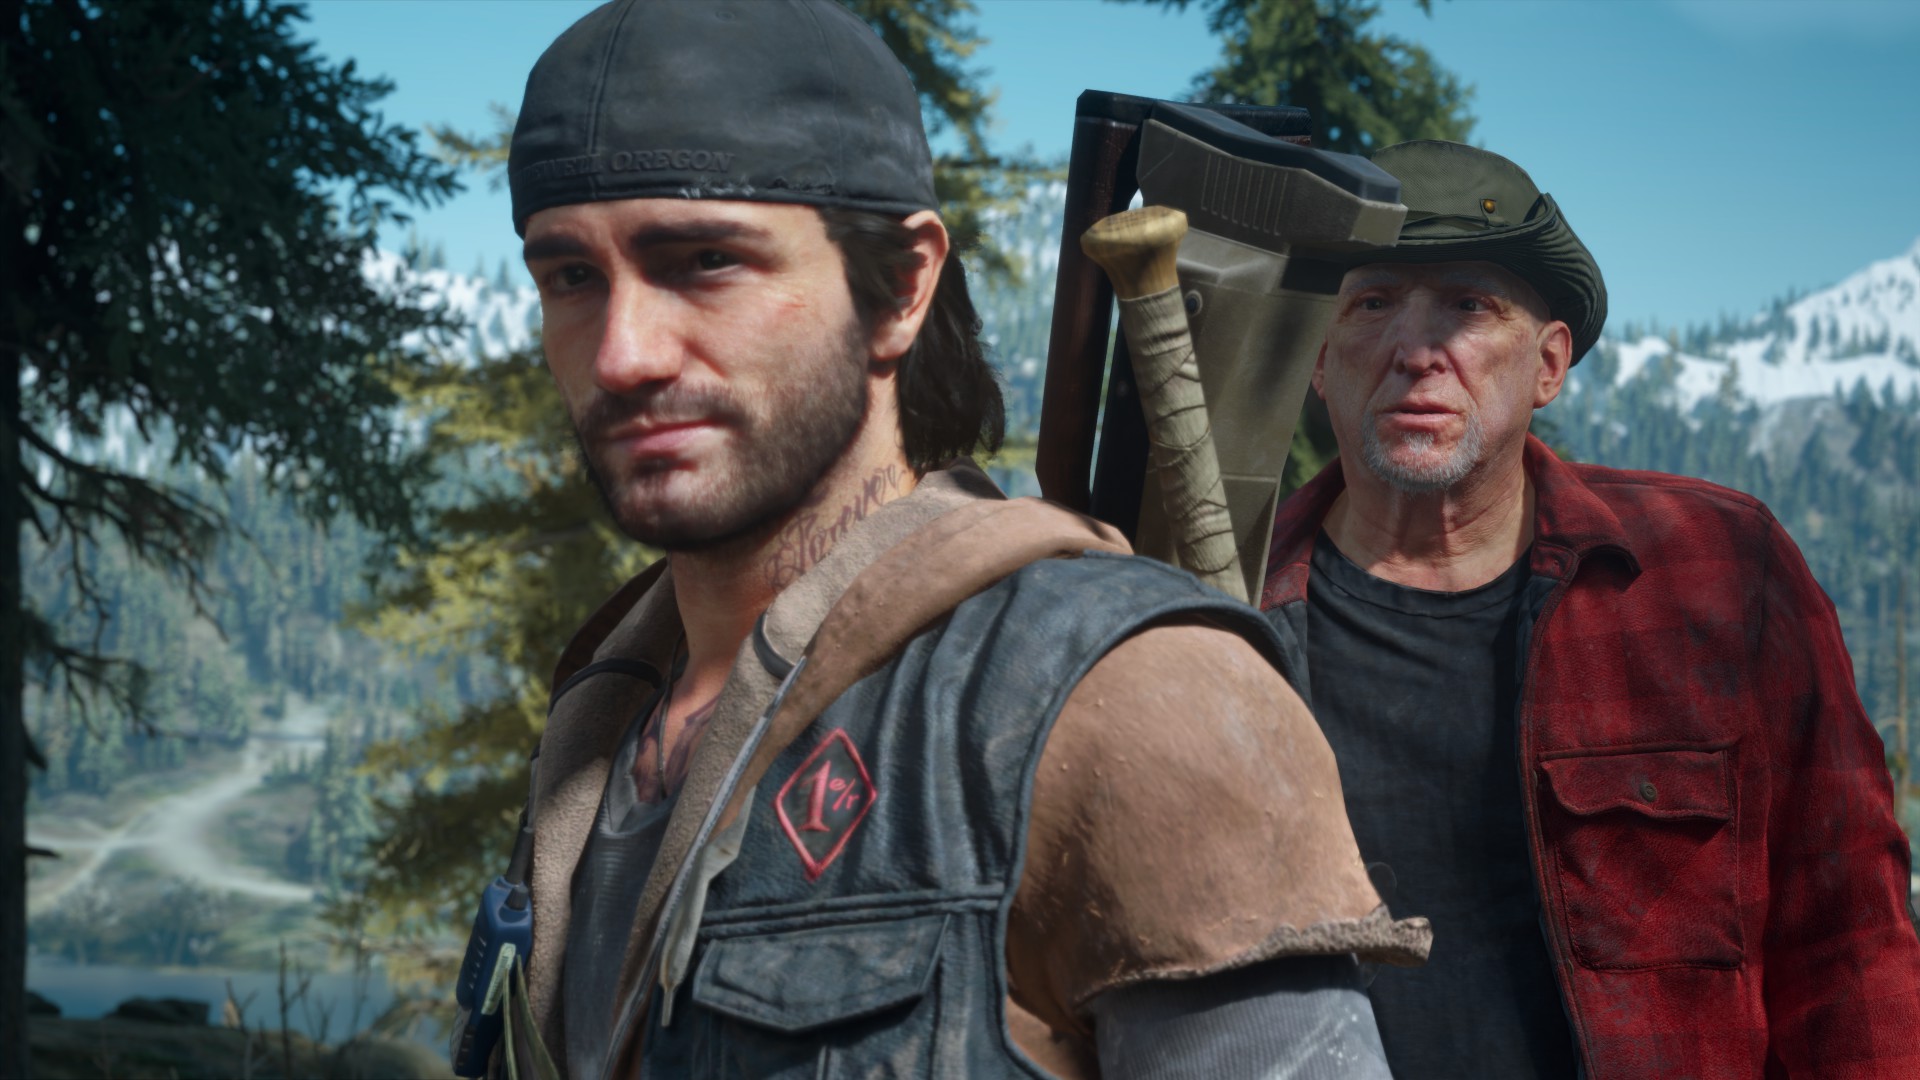 How the game goes. Days gone. Days gone Дикон. Дикон сент Джон Days gone. Days gone Дикон Сейнт-Джон.